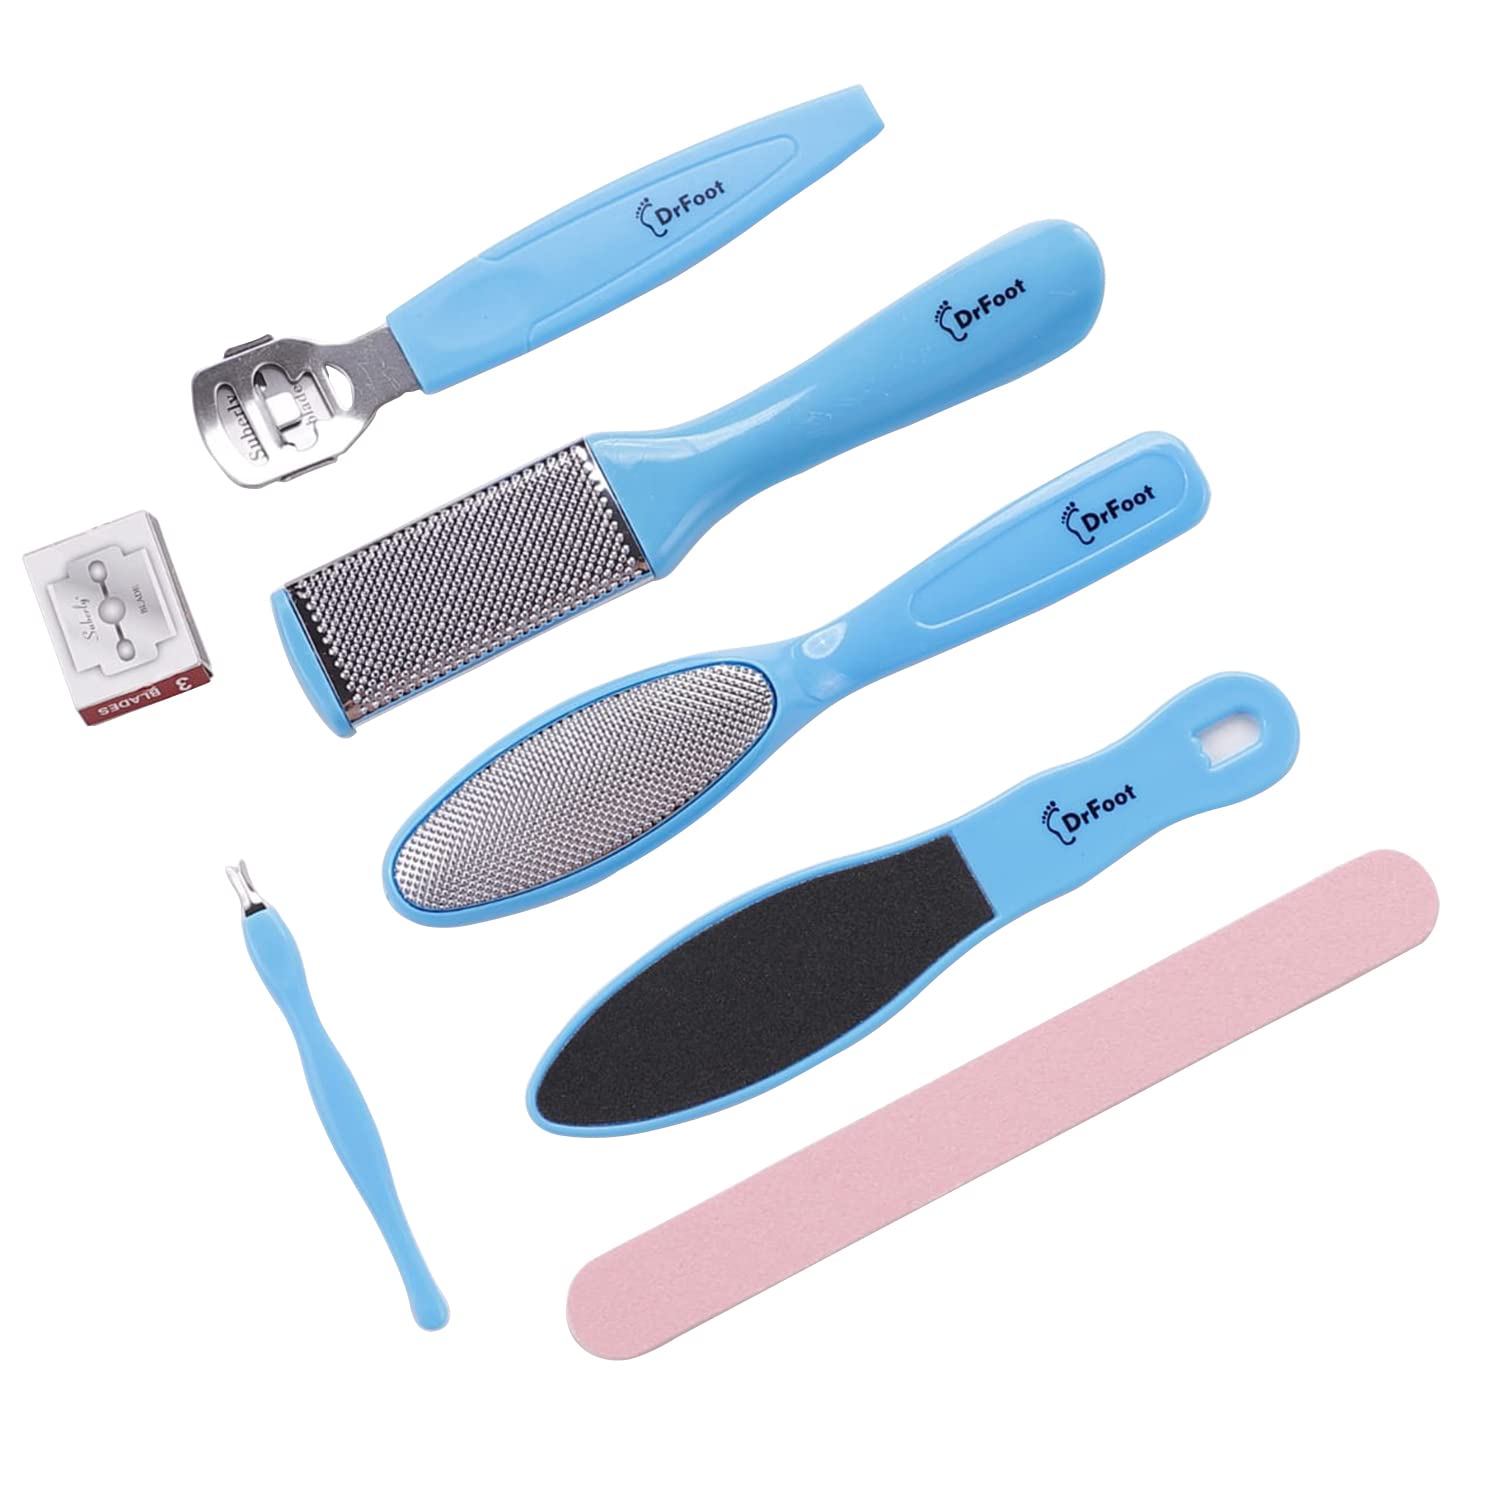 8 Pcs Foot Rubbing Board Care Trimmer Smooth Pedicure Wand Nails